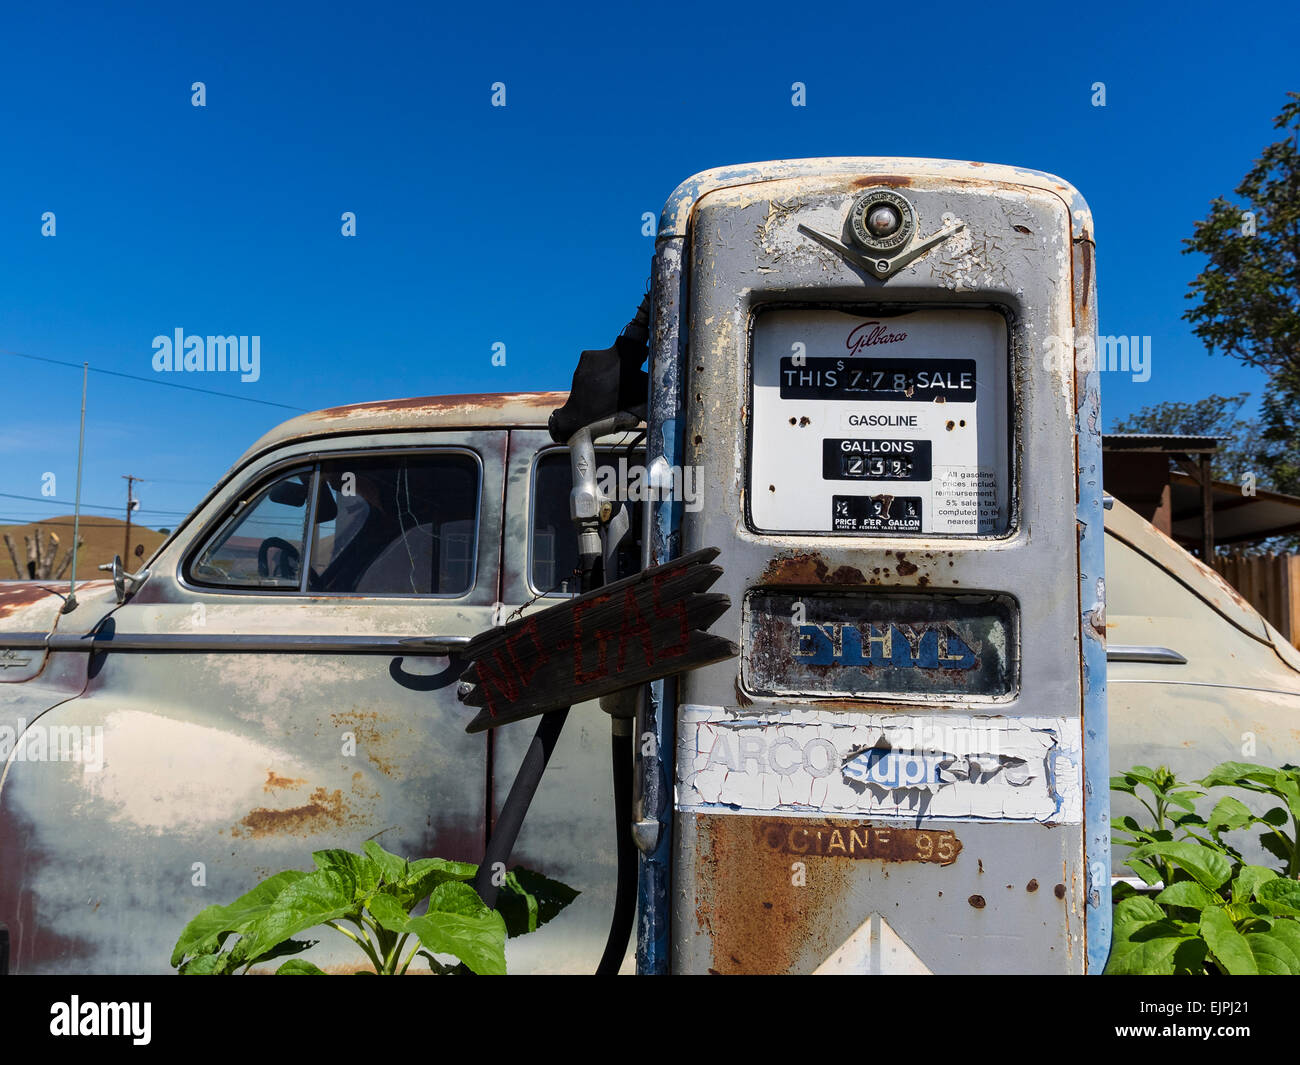 A 1947 Chrysler 4-door sedan rusting with faded paint sits parked in front of two old style gas pumps at a filling station. Stock Photo